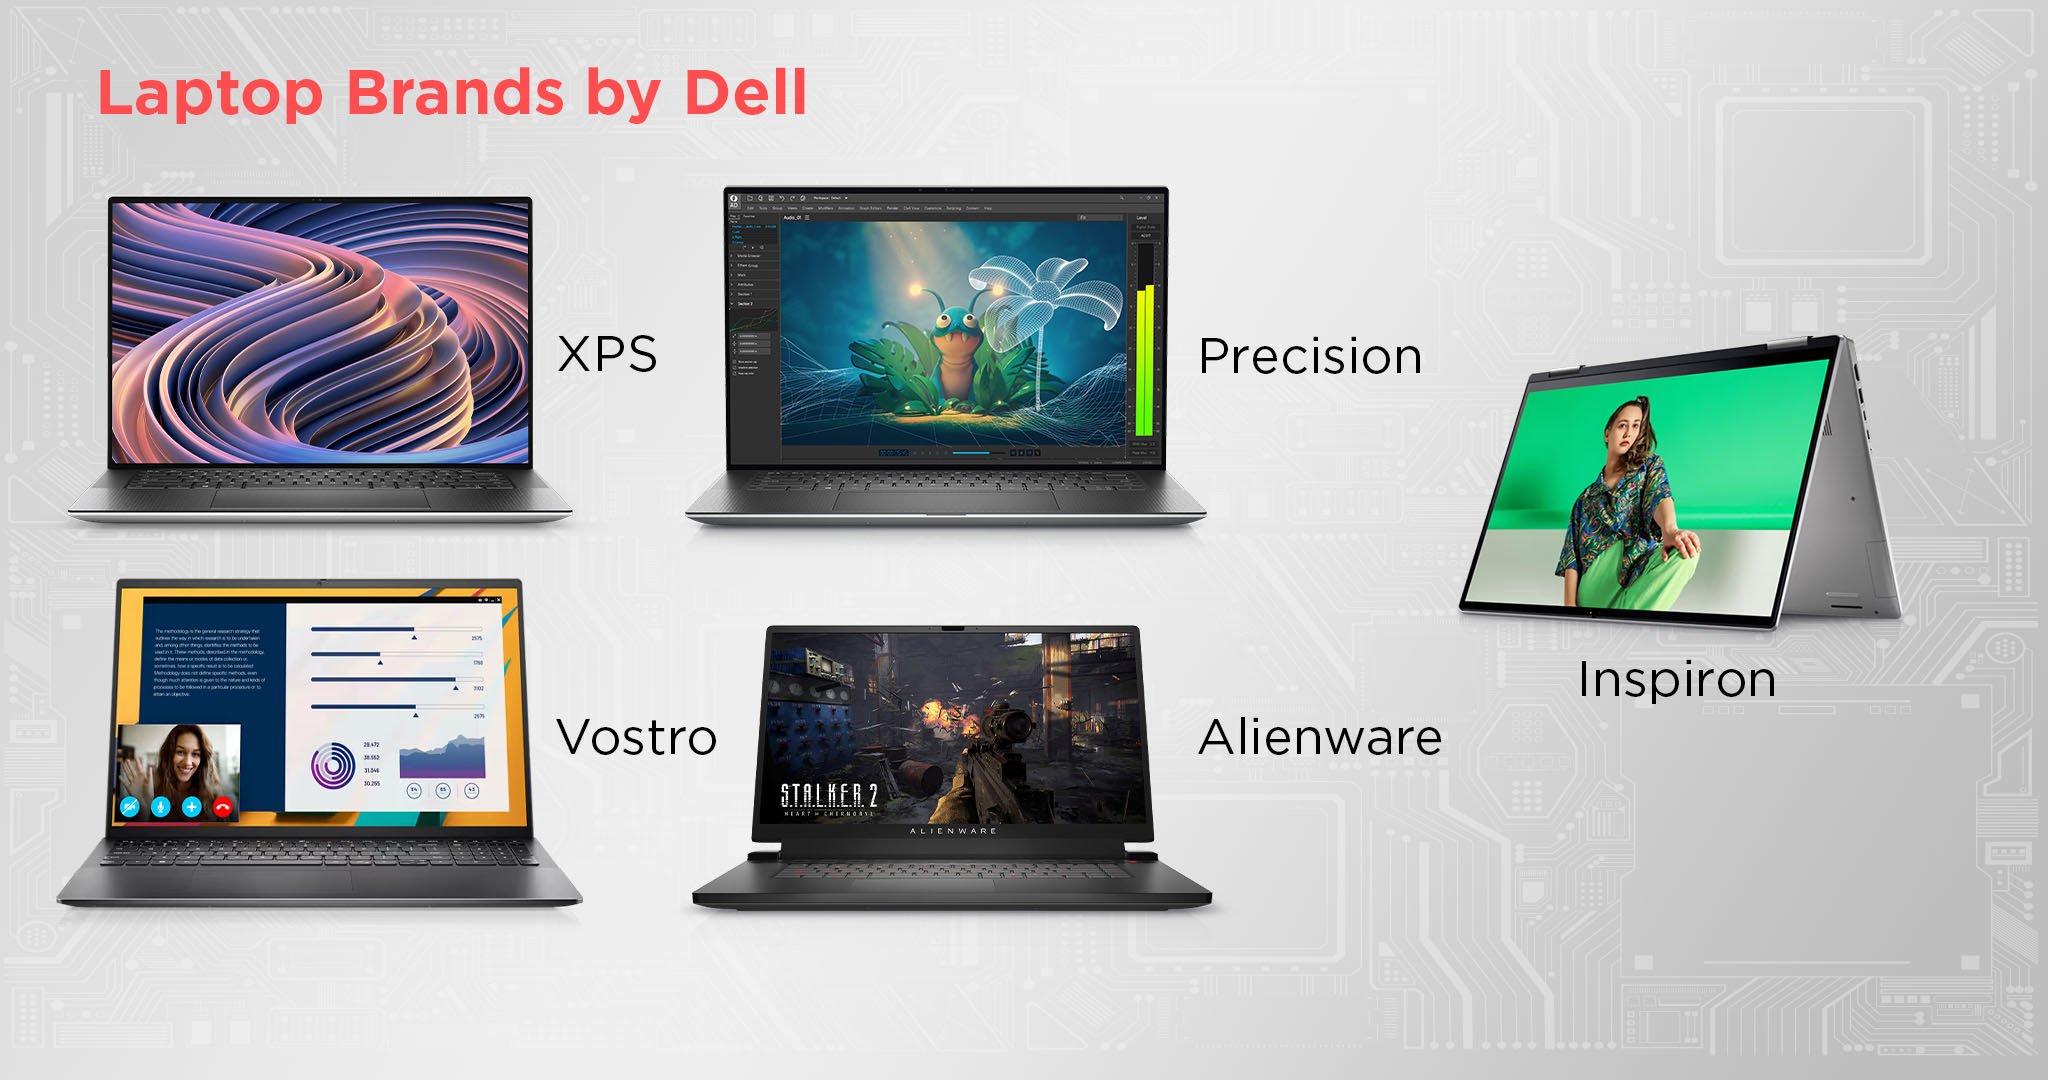 Dell vs. HP Laptops - Which Brand Best Fits Your Needs?